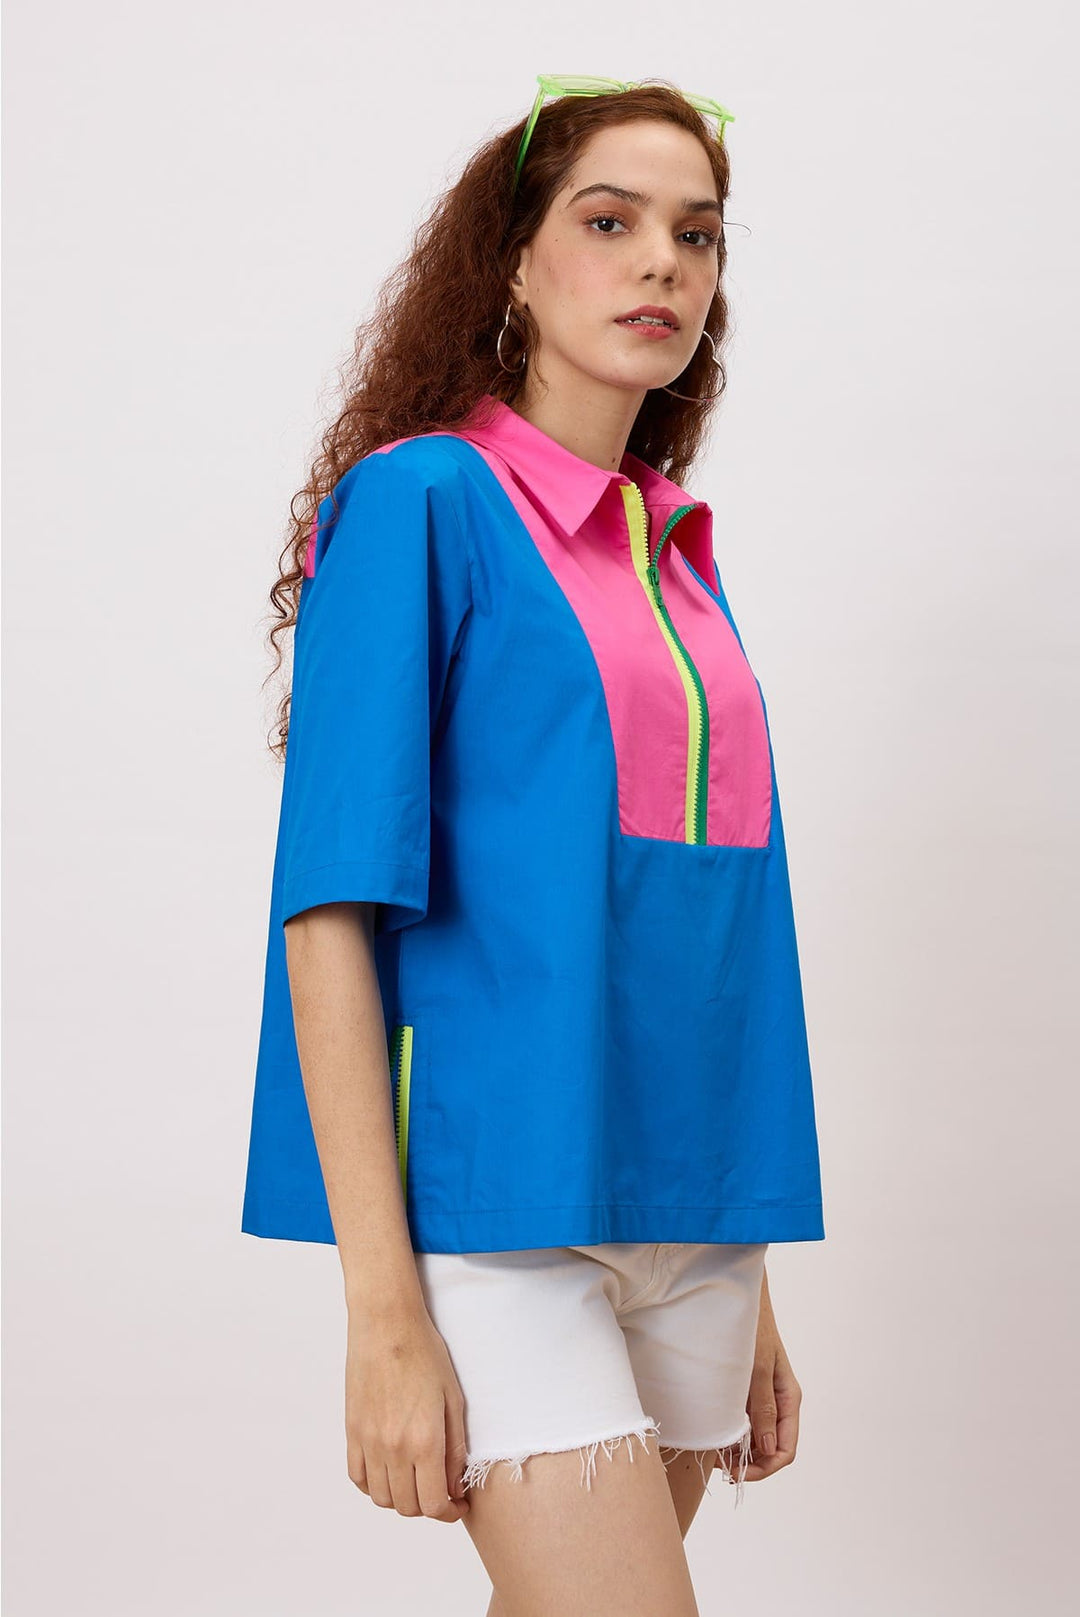 Bexley Top An easy, boxy top with a contrast coloured collar and yoke